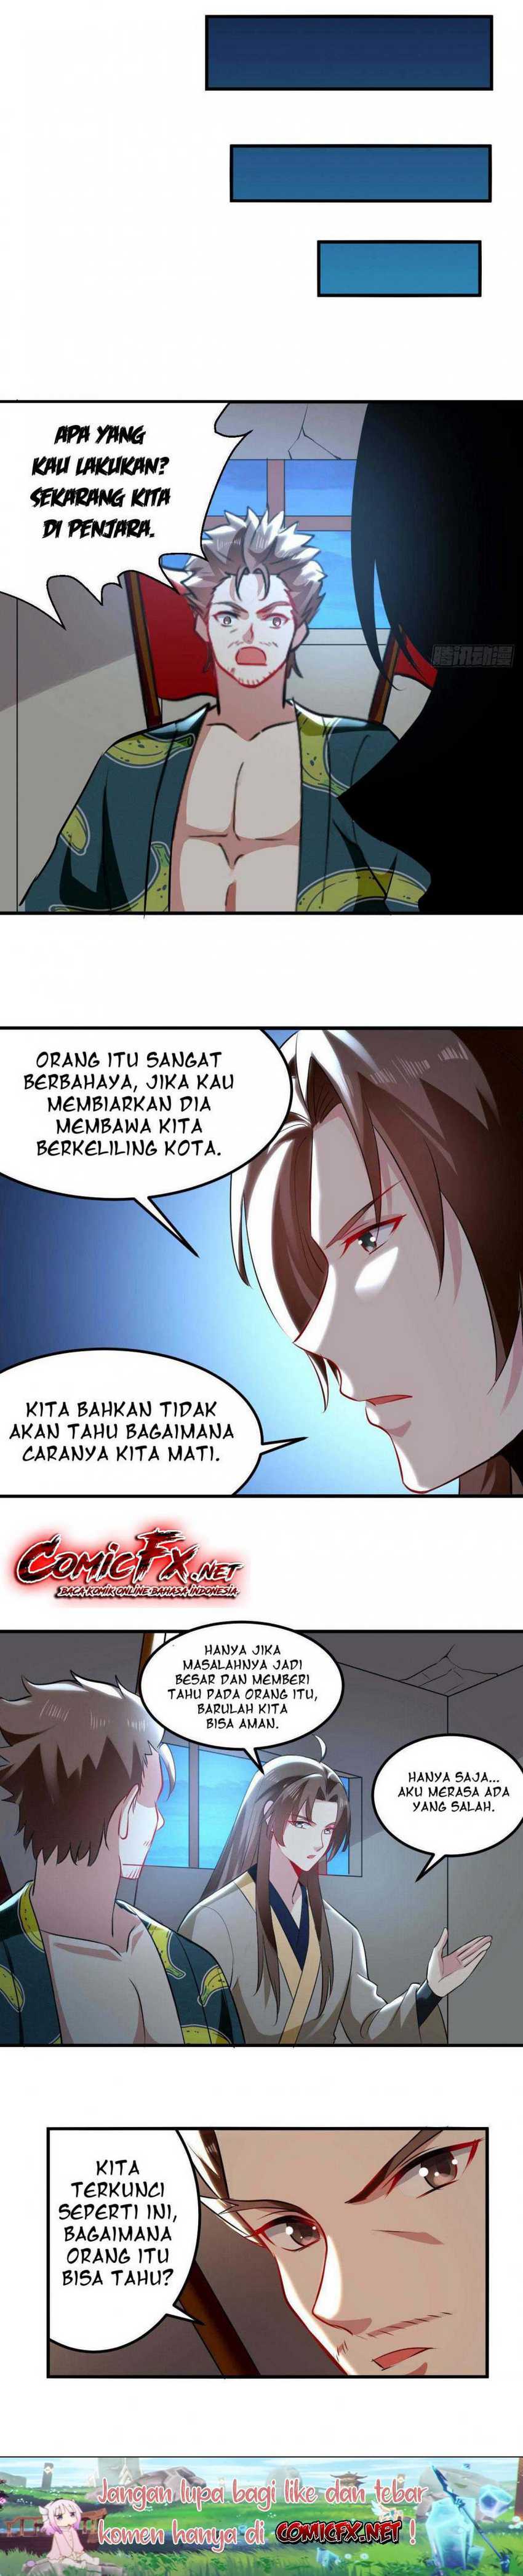 Outsider Super Son In Law Chapter 67